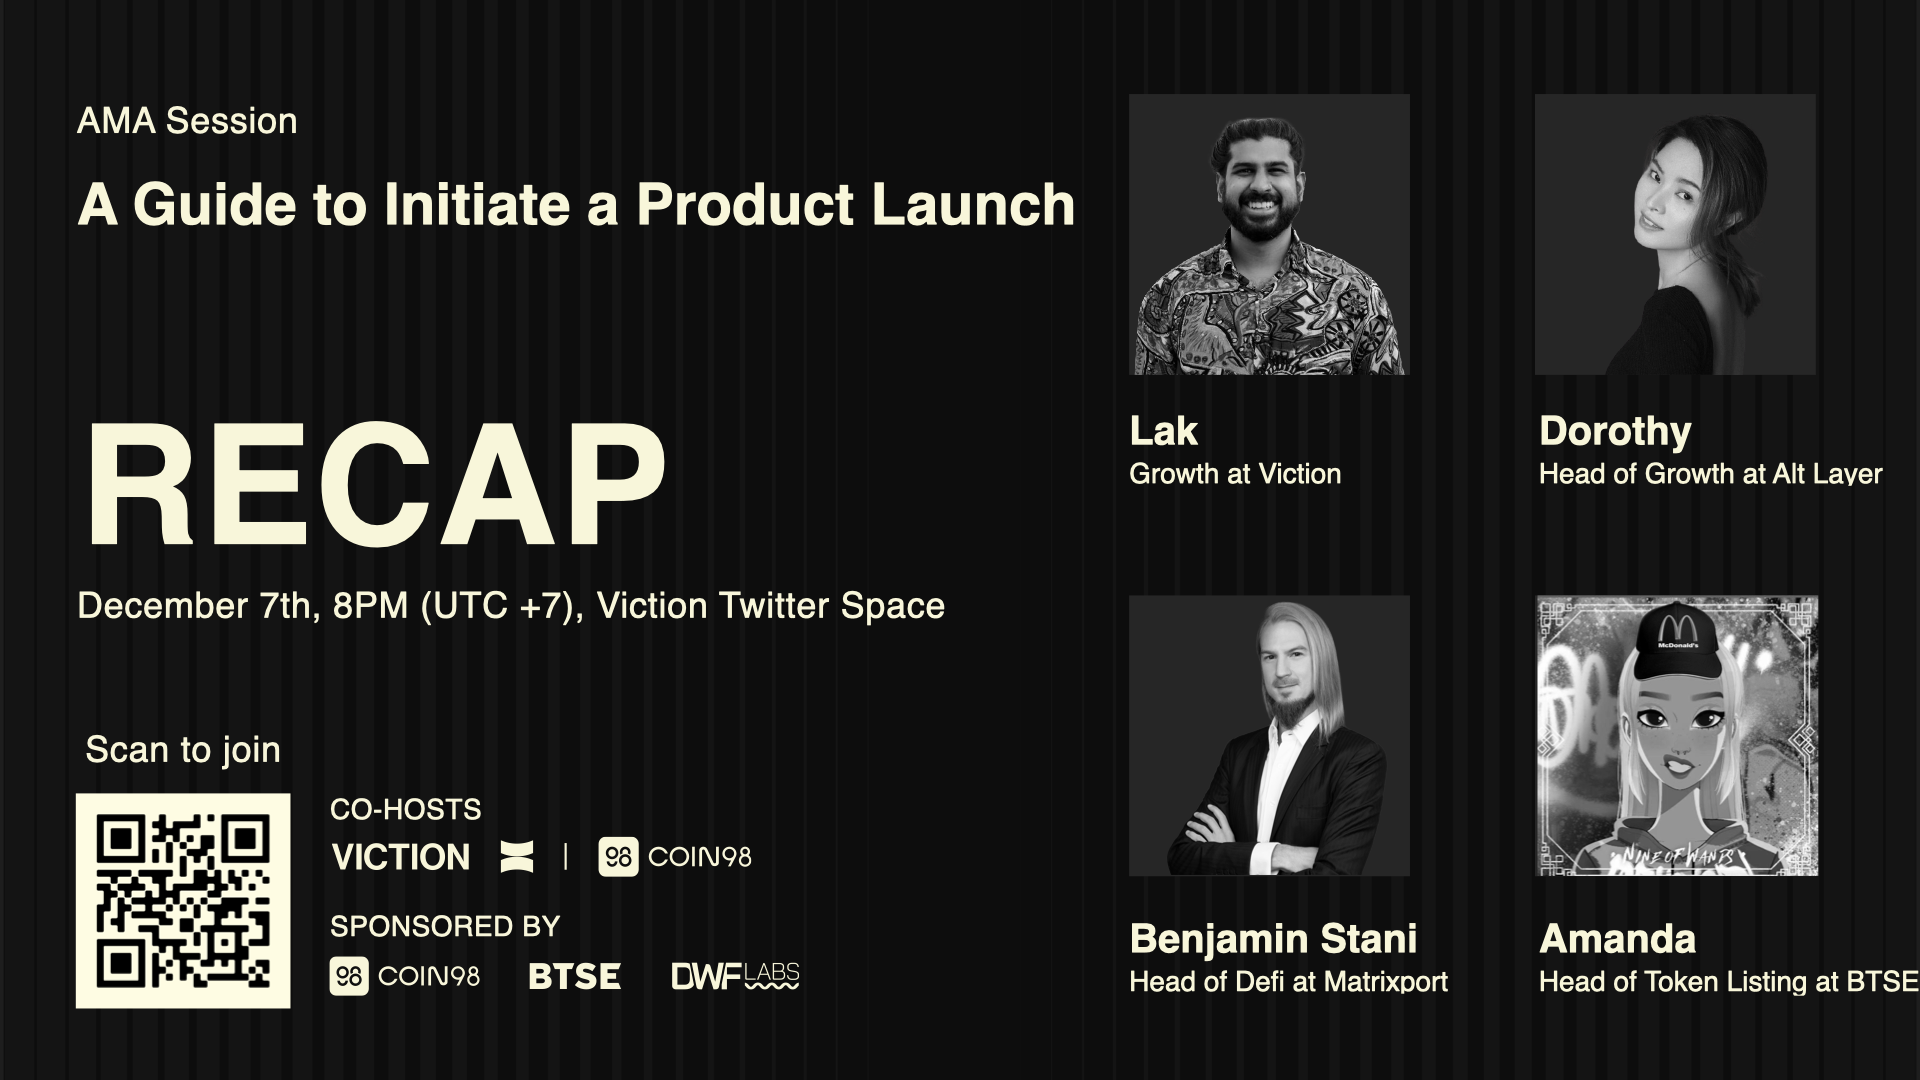 A Guide to Initiate a Product Launch AMA Recap